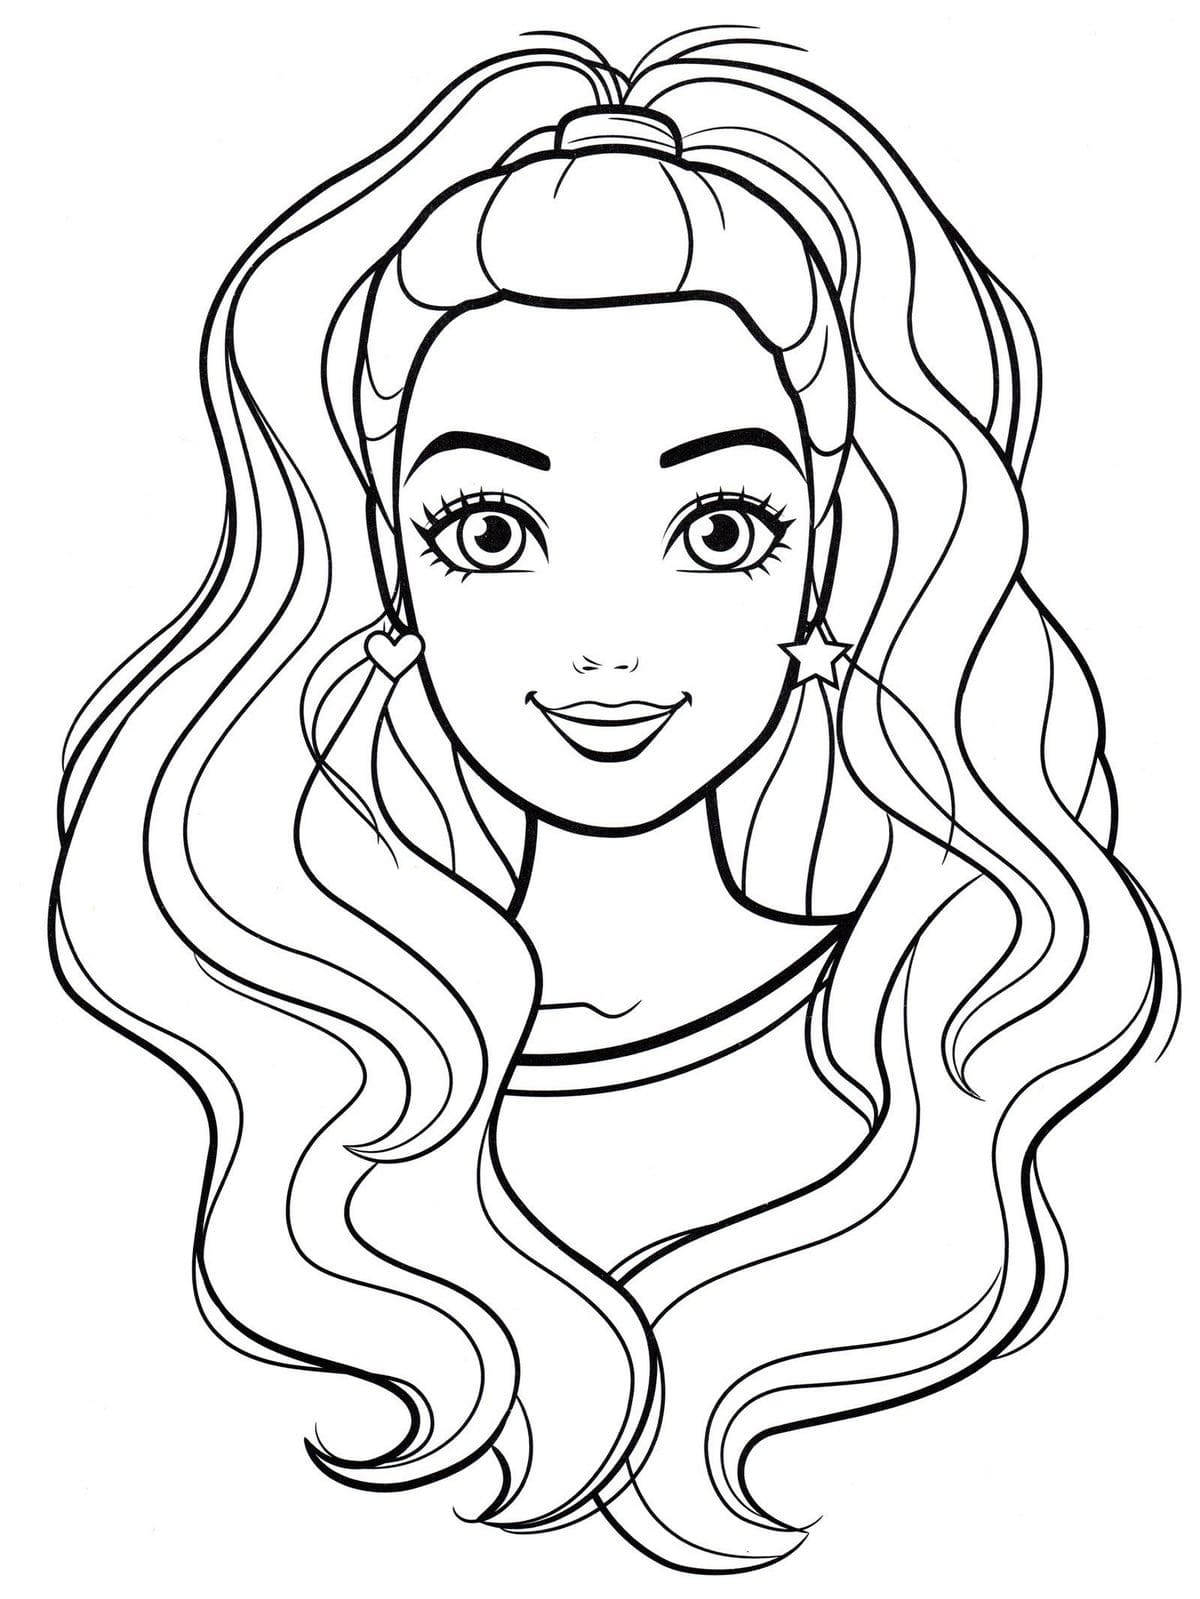 Make up Coloring Pages for Kids, Make up Printables, Make up Day Sheet,  Beauty Coloring Pages, Make up Print, Cosmetics Coloring Pages, Spa 